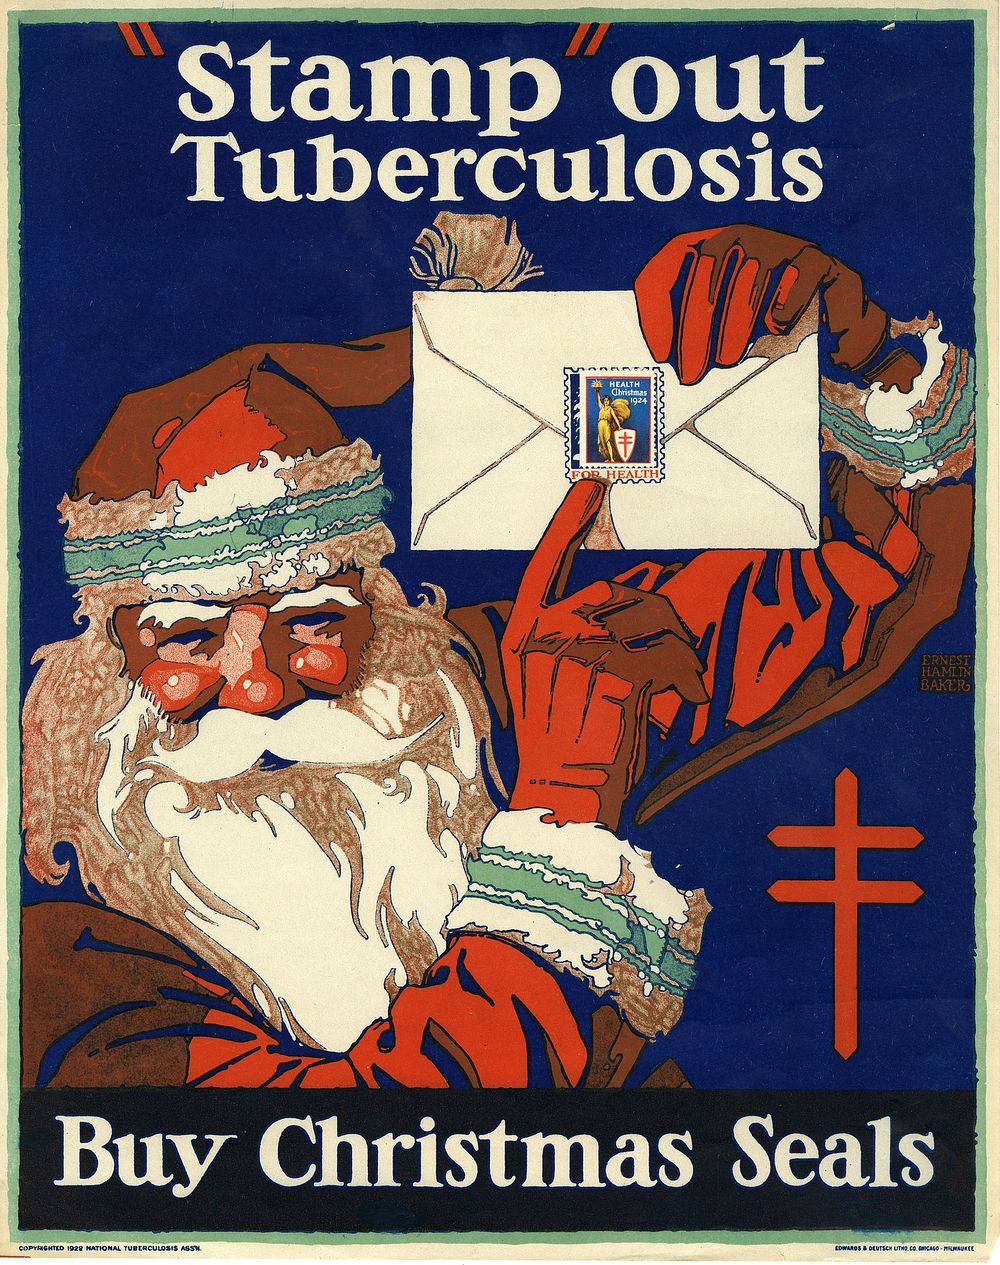 "Stamp" out tuberculosis. Multicolor poster. Title at top of poster. Visual image is an illustration featuring Santa Claus…